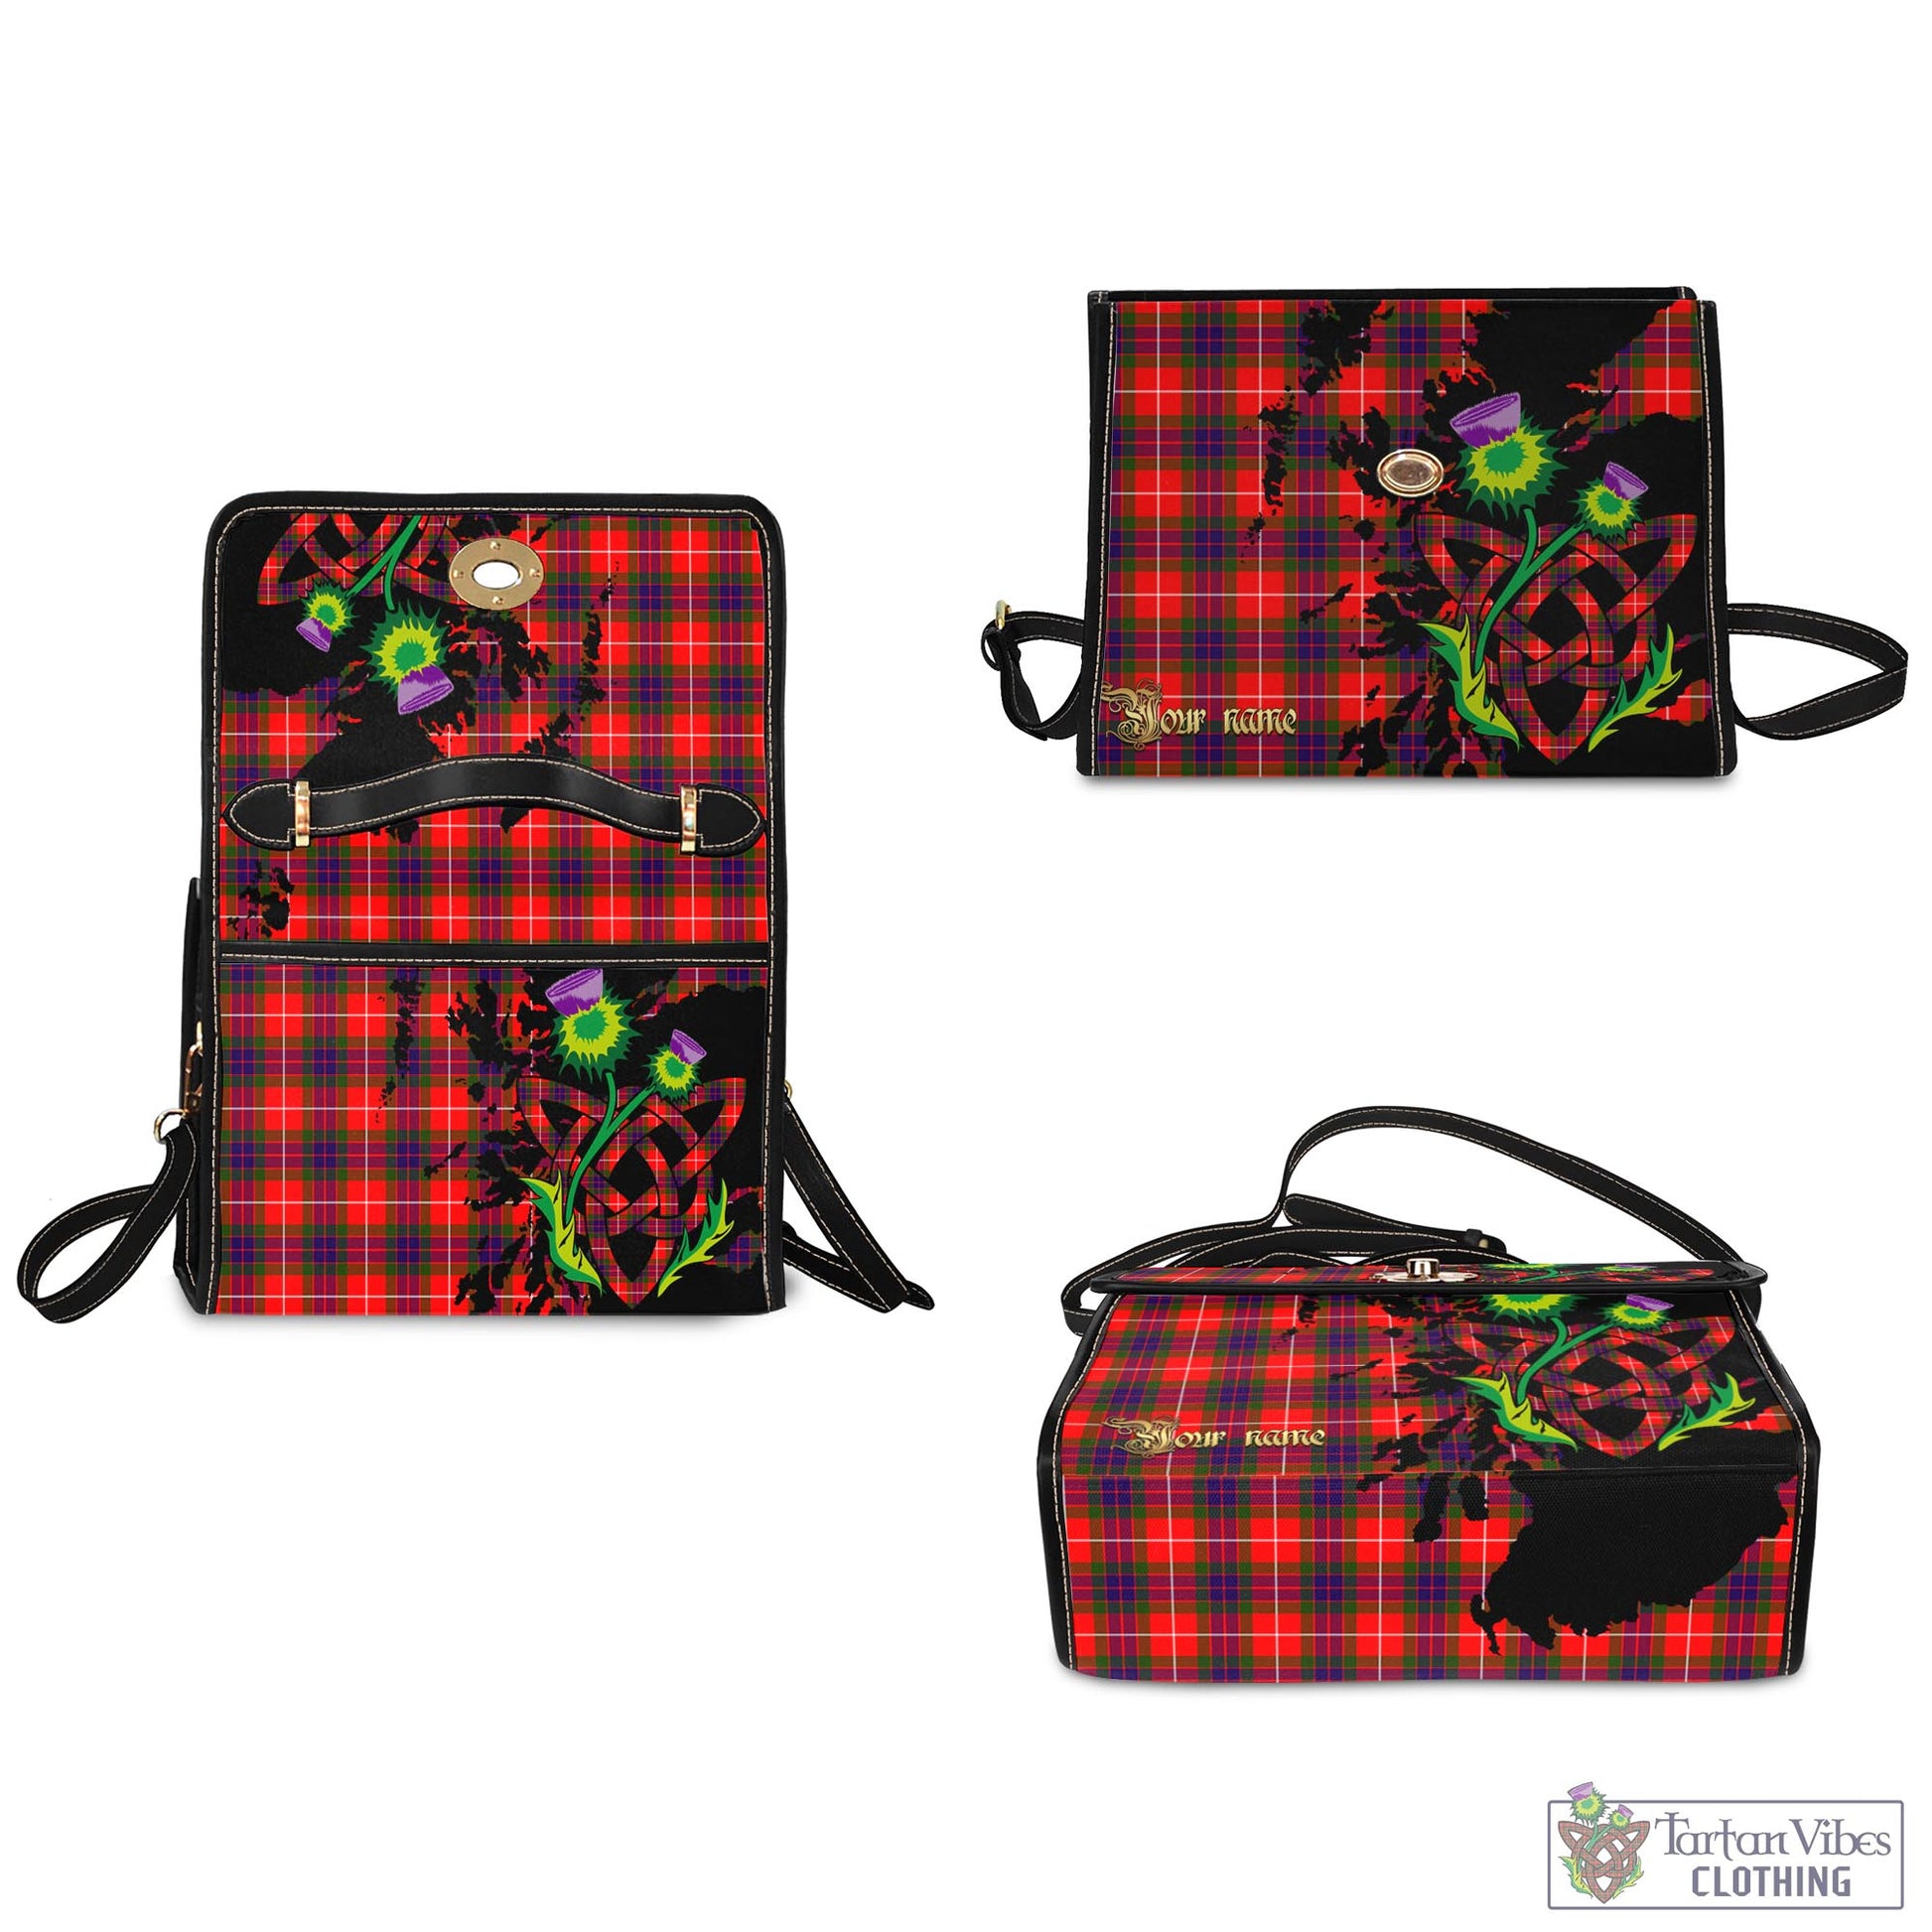 Tartan Vibes Clothing Abernethy Tartan Waterproof Canvas Bag with Scotland Map and Thistle Celtic Accents